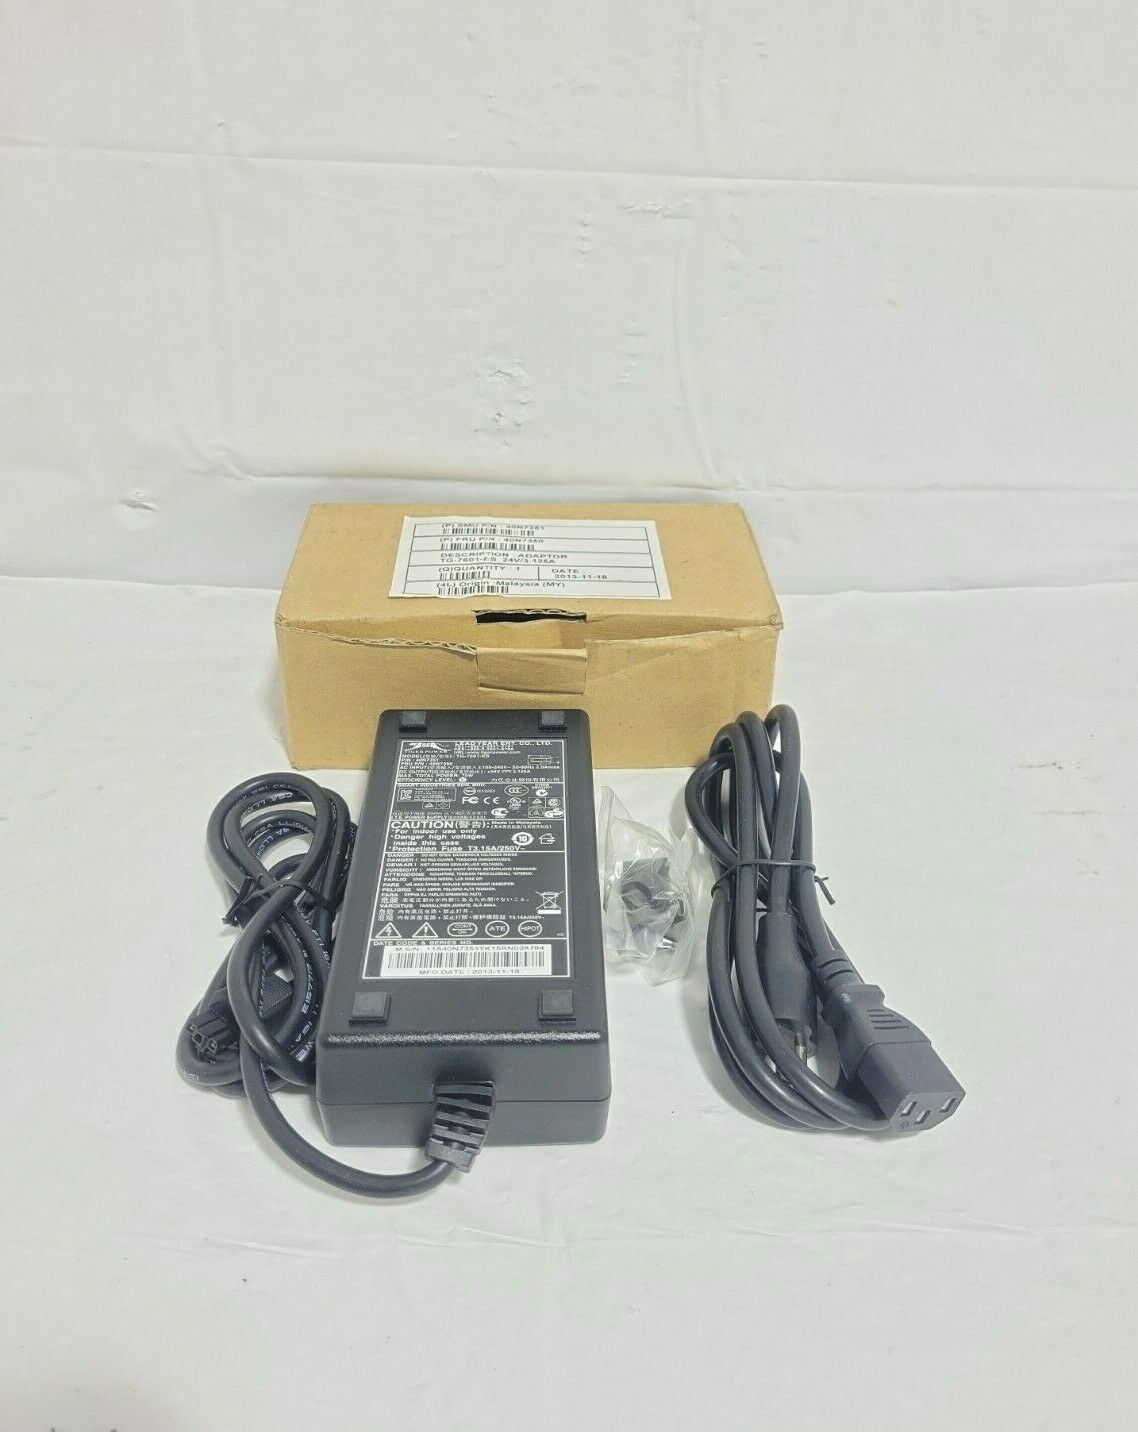 Tiger P/N: 40N7351 TG-7601-ES 24V 75W Power Supply Thermal POS Receipt Printer NEW OTHER This item is being sold as n